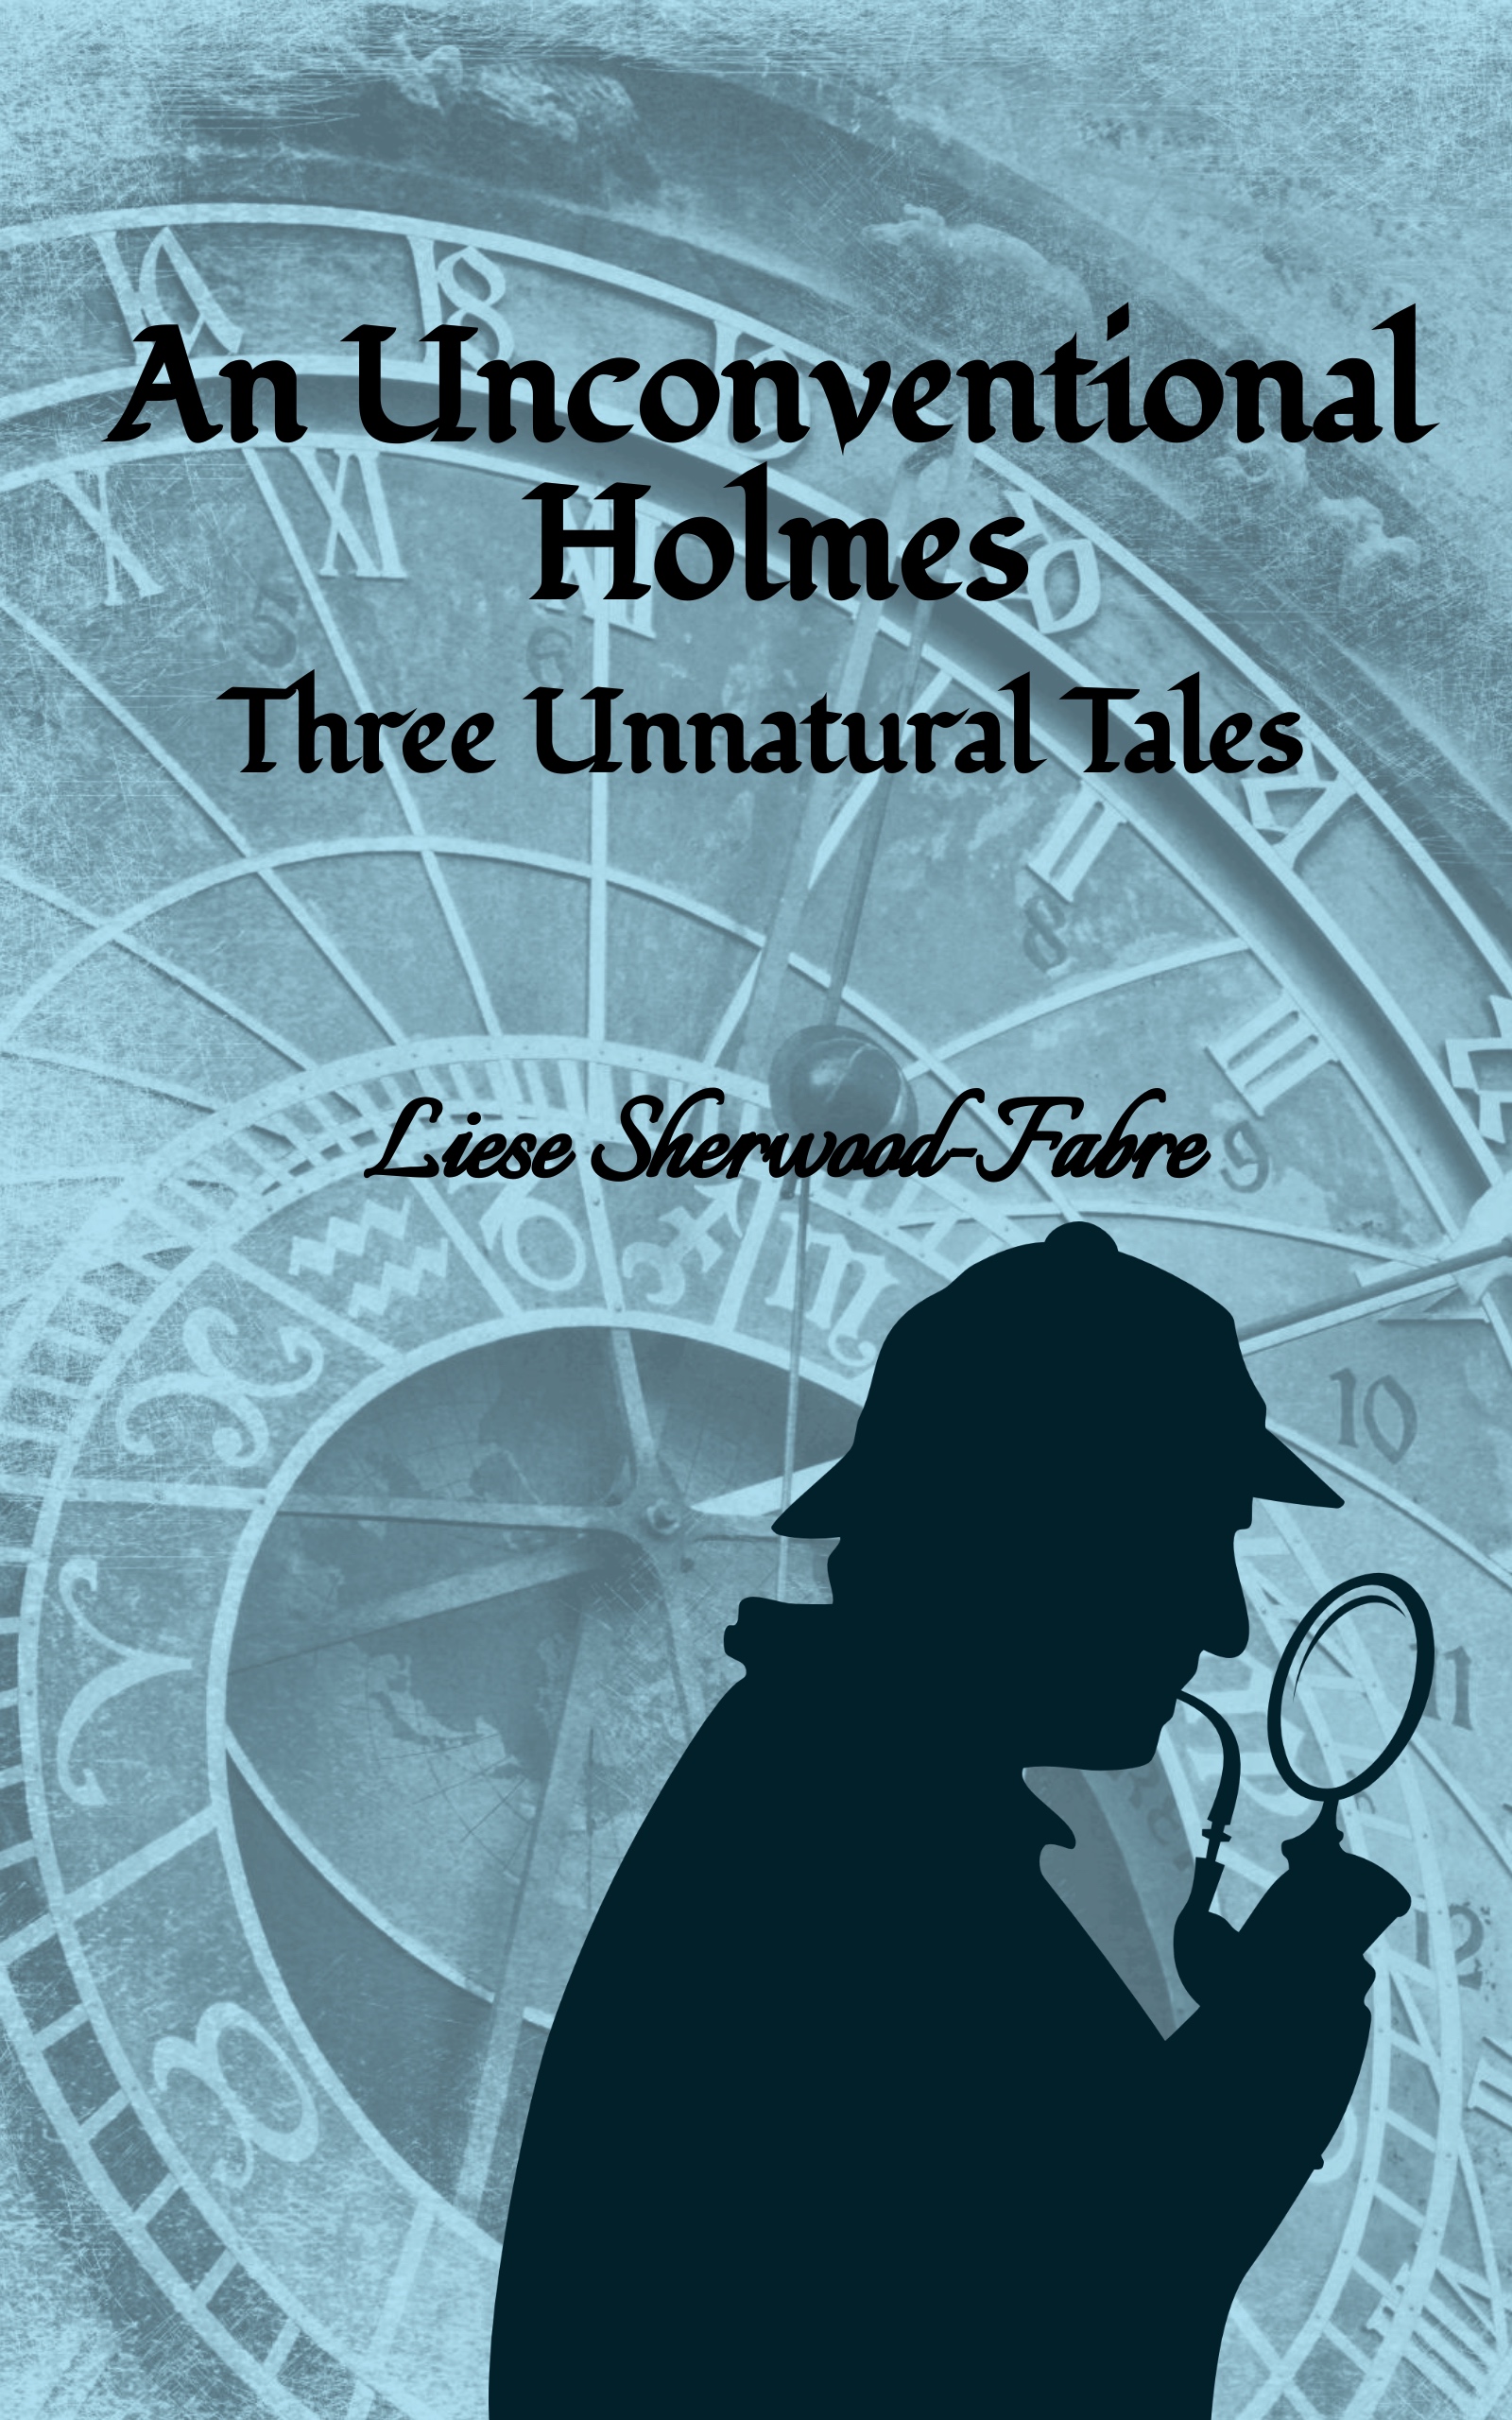 An Unconventional Holmes -- Liese Sherwood Fabre